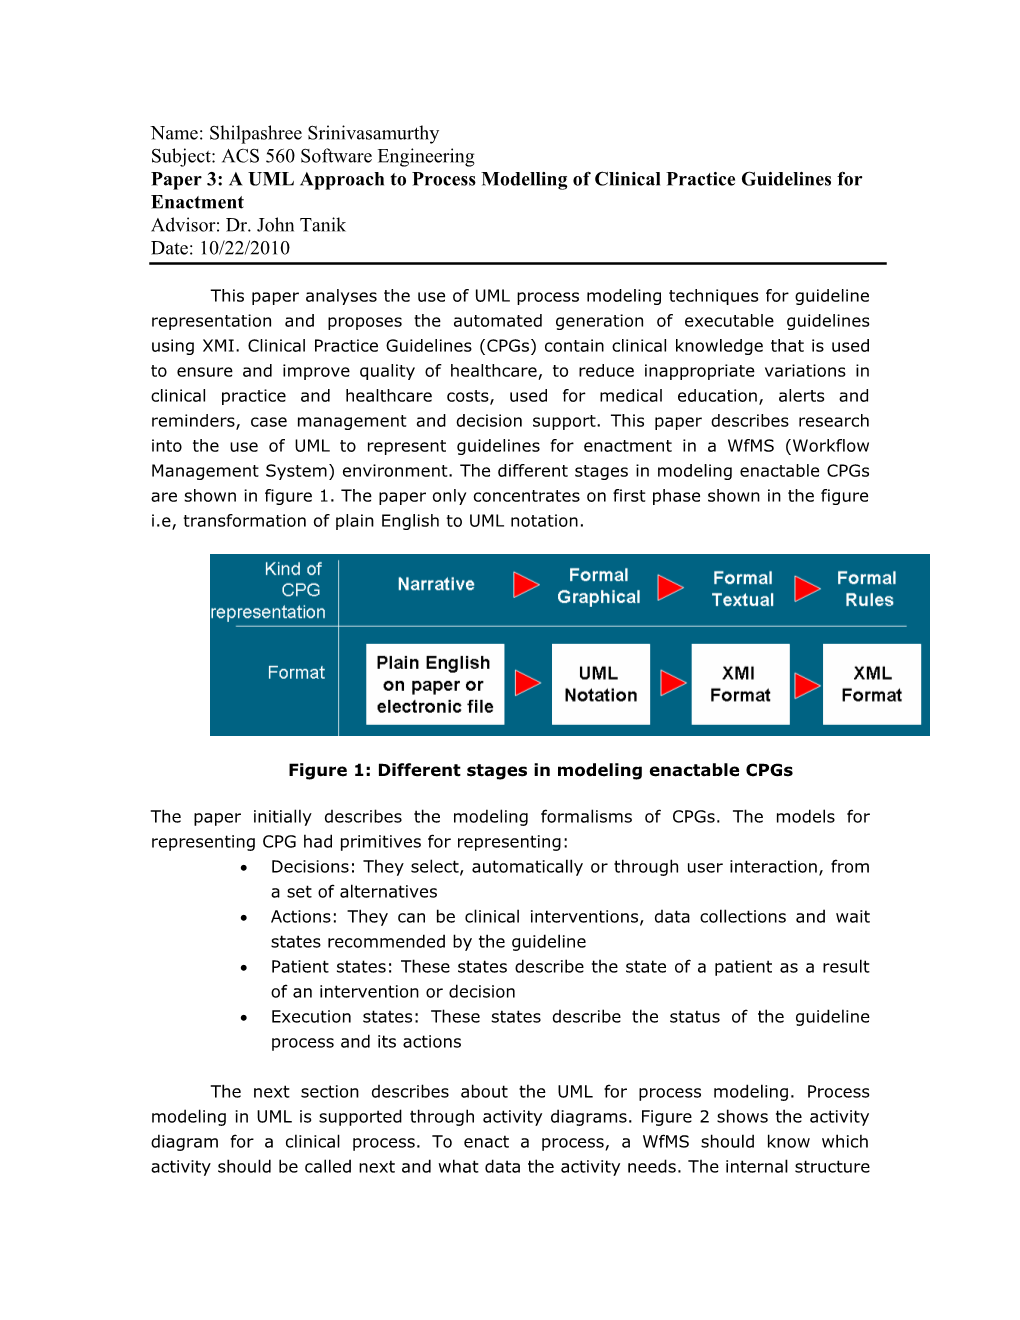 Paper 3: a UML Approach to Process Modelling of Clinical Practice Guidelines for Enactment